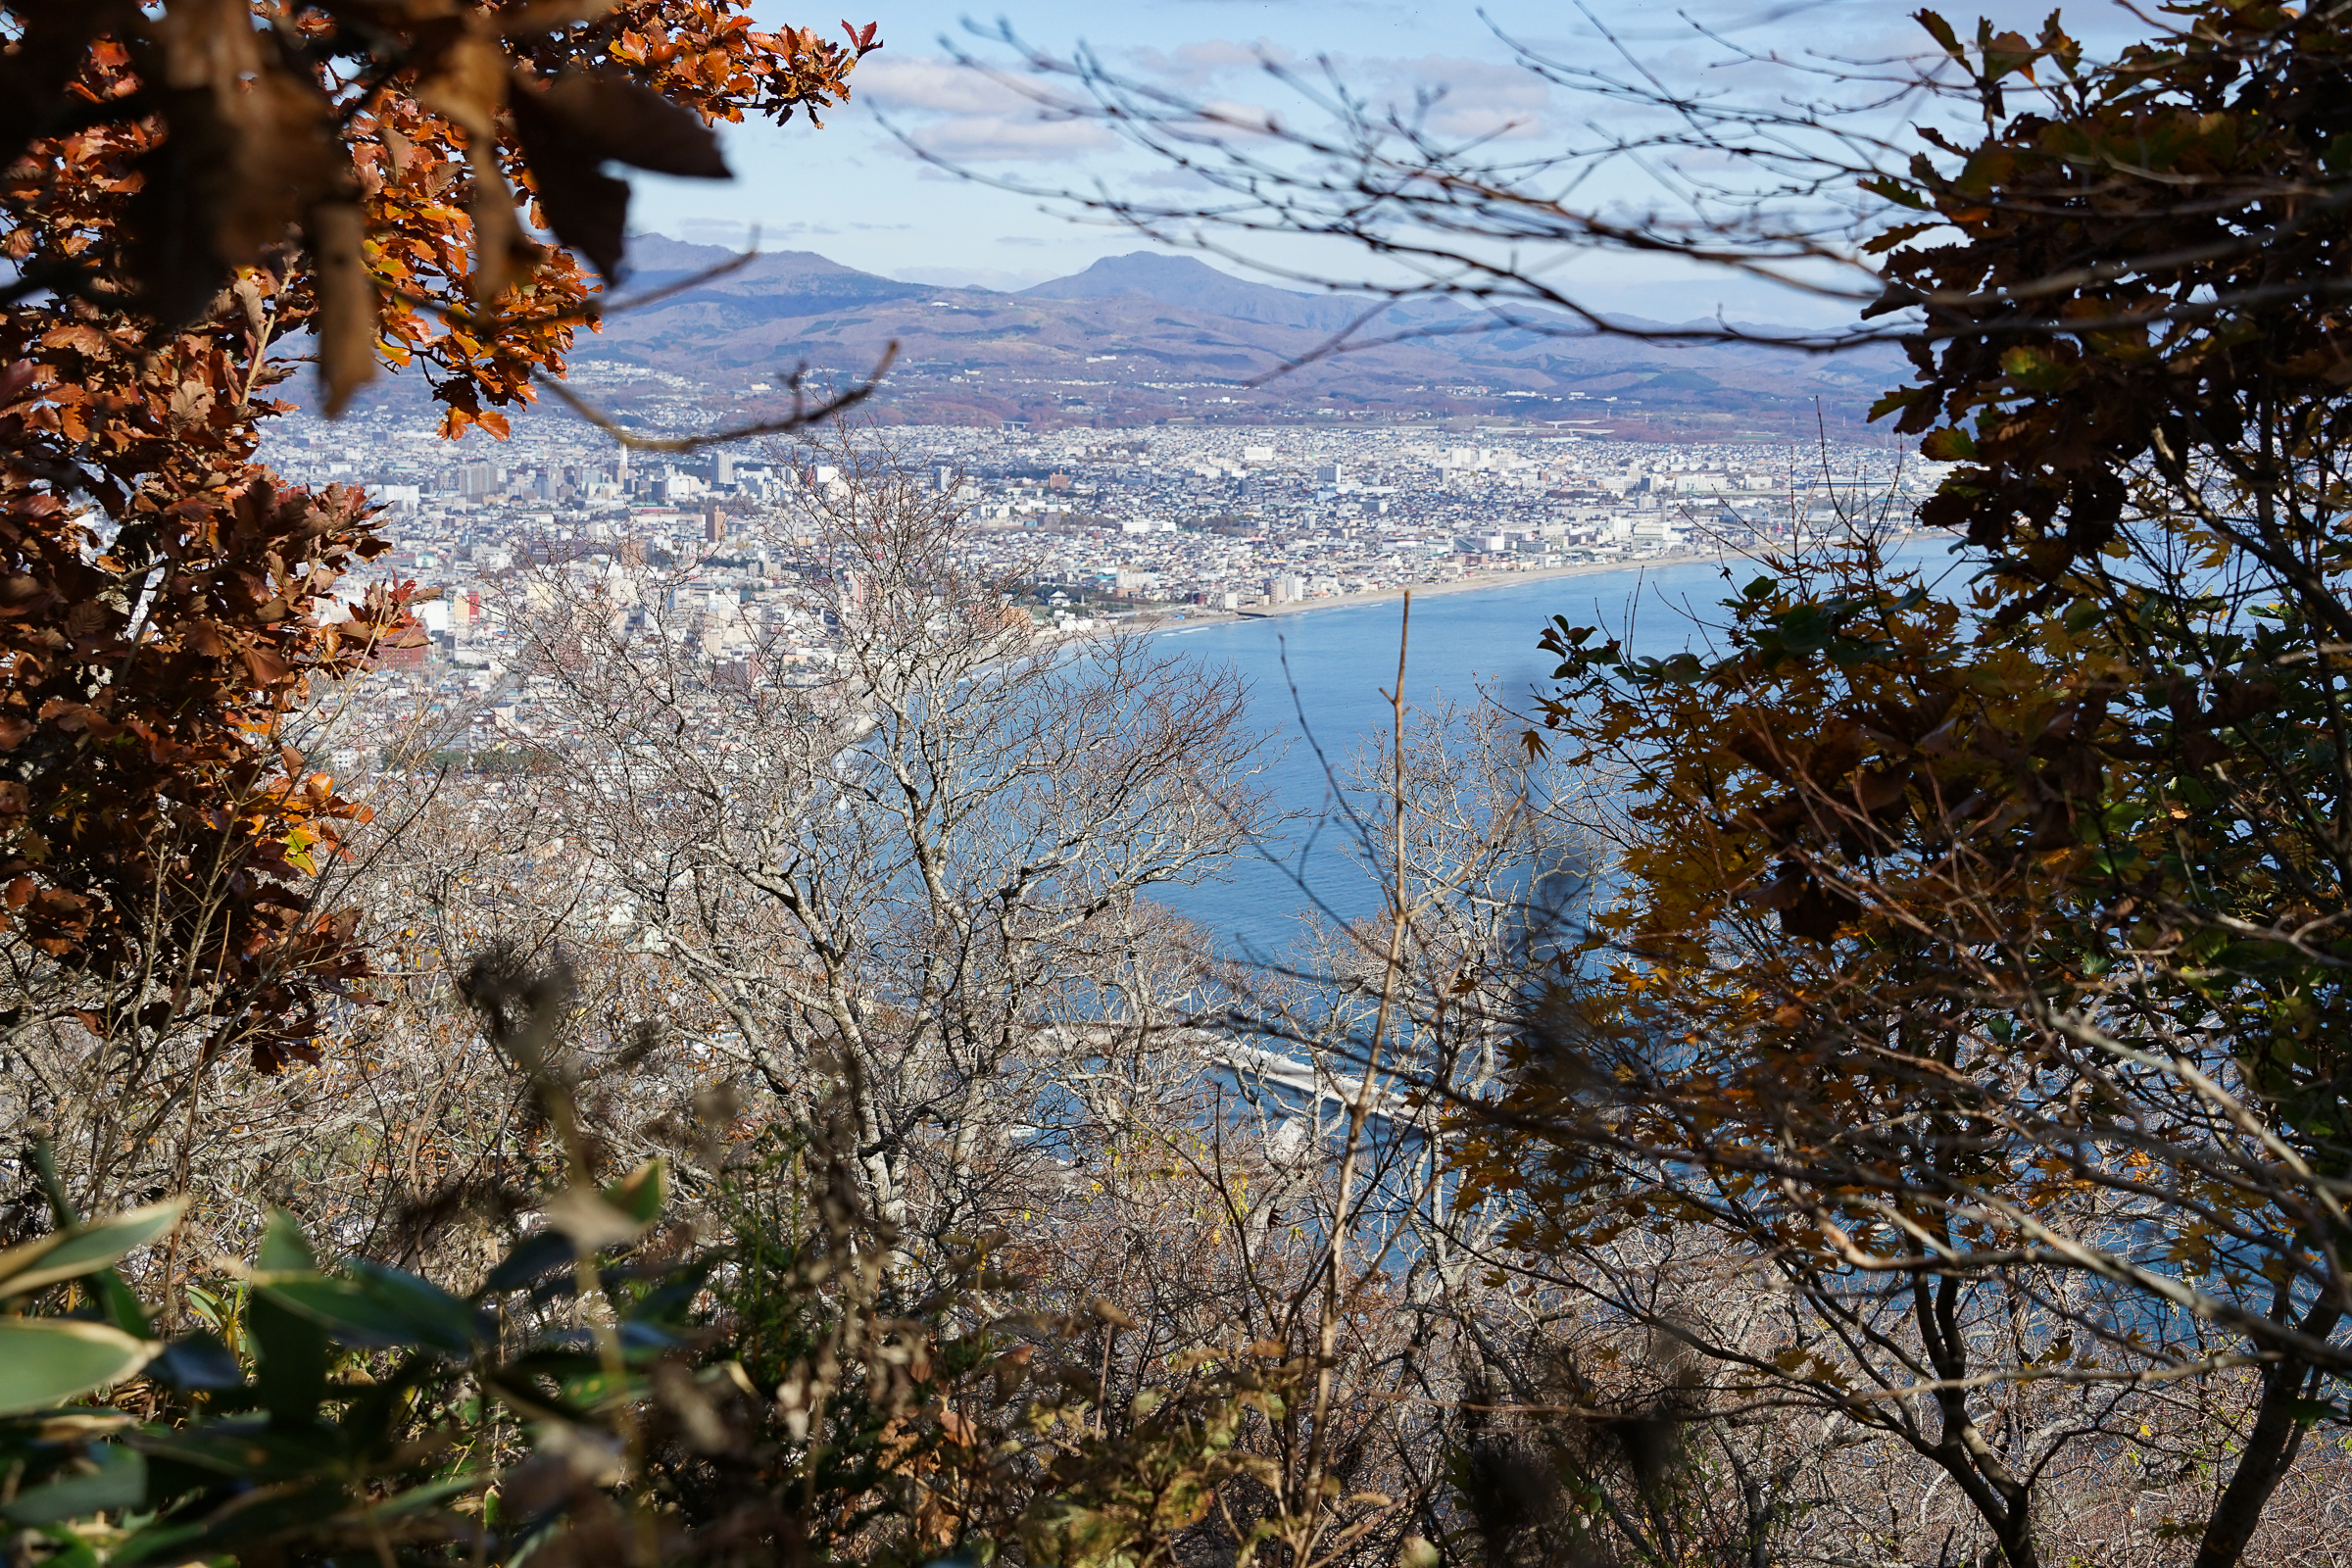 The view of Hakodate bay and Hakodate city as seen from the Mt. Hakodate climb.